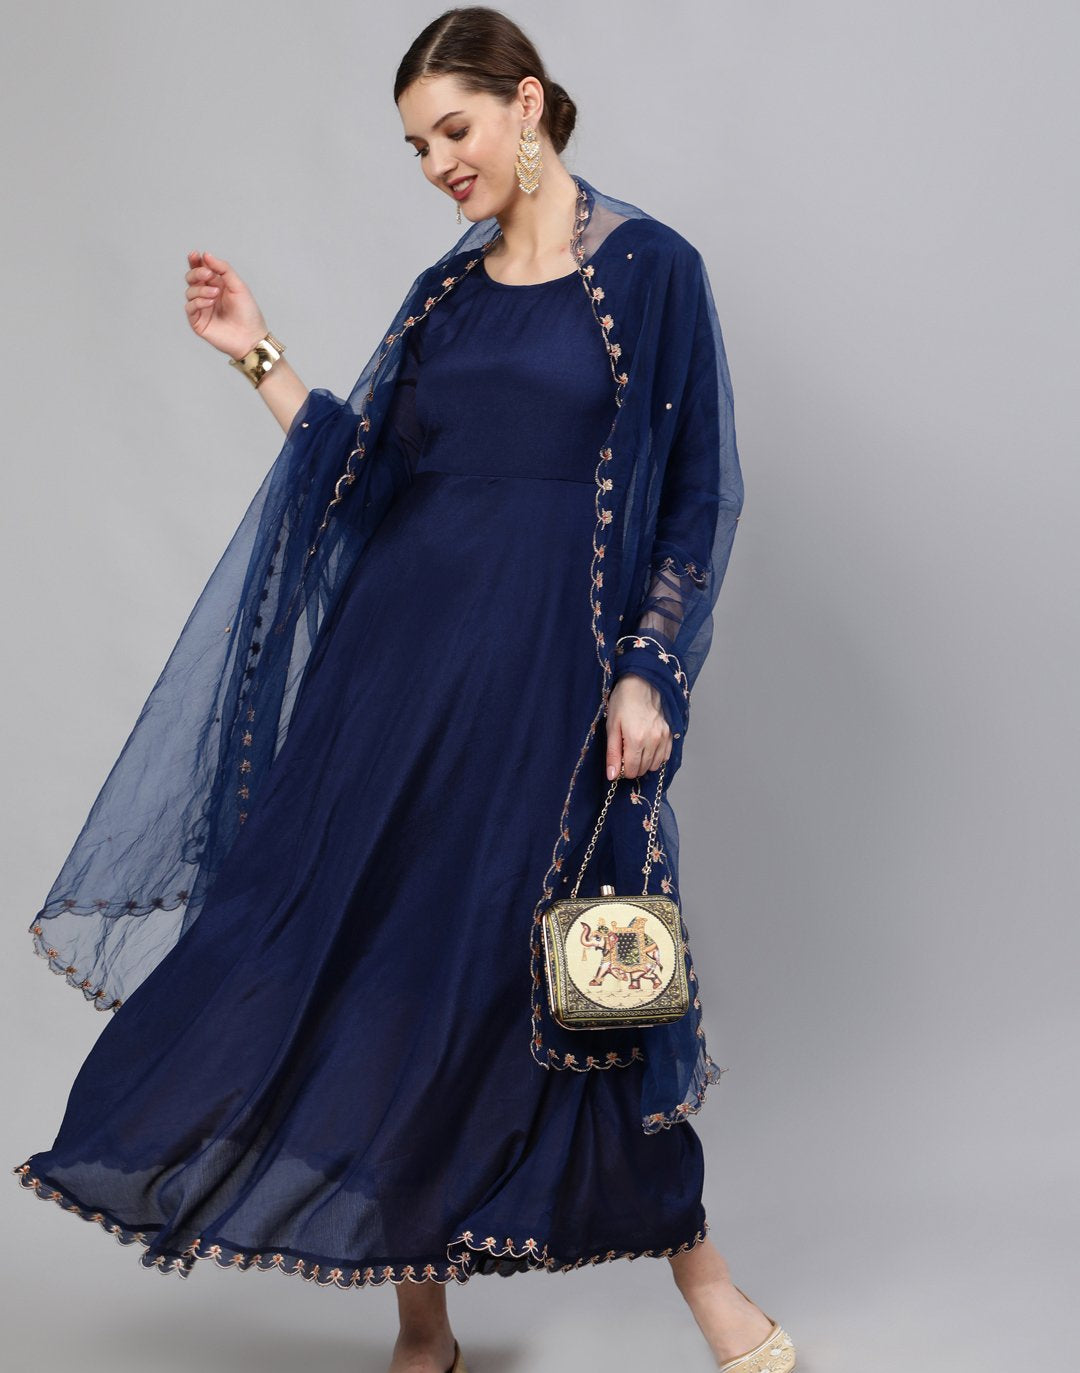 Women Navy Blue Embroidered Maxi Dress WIth Scalloped Dupatta